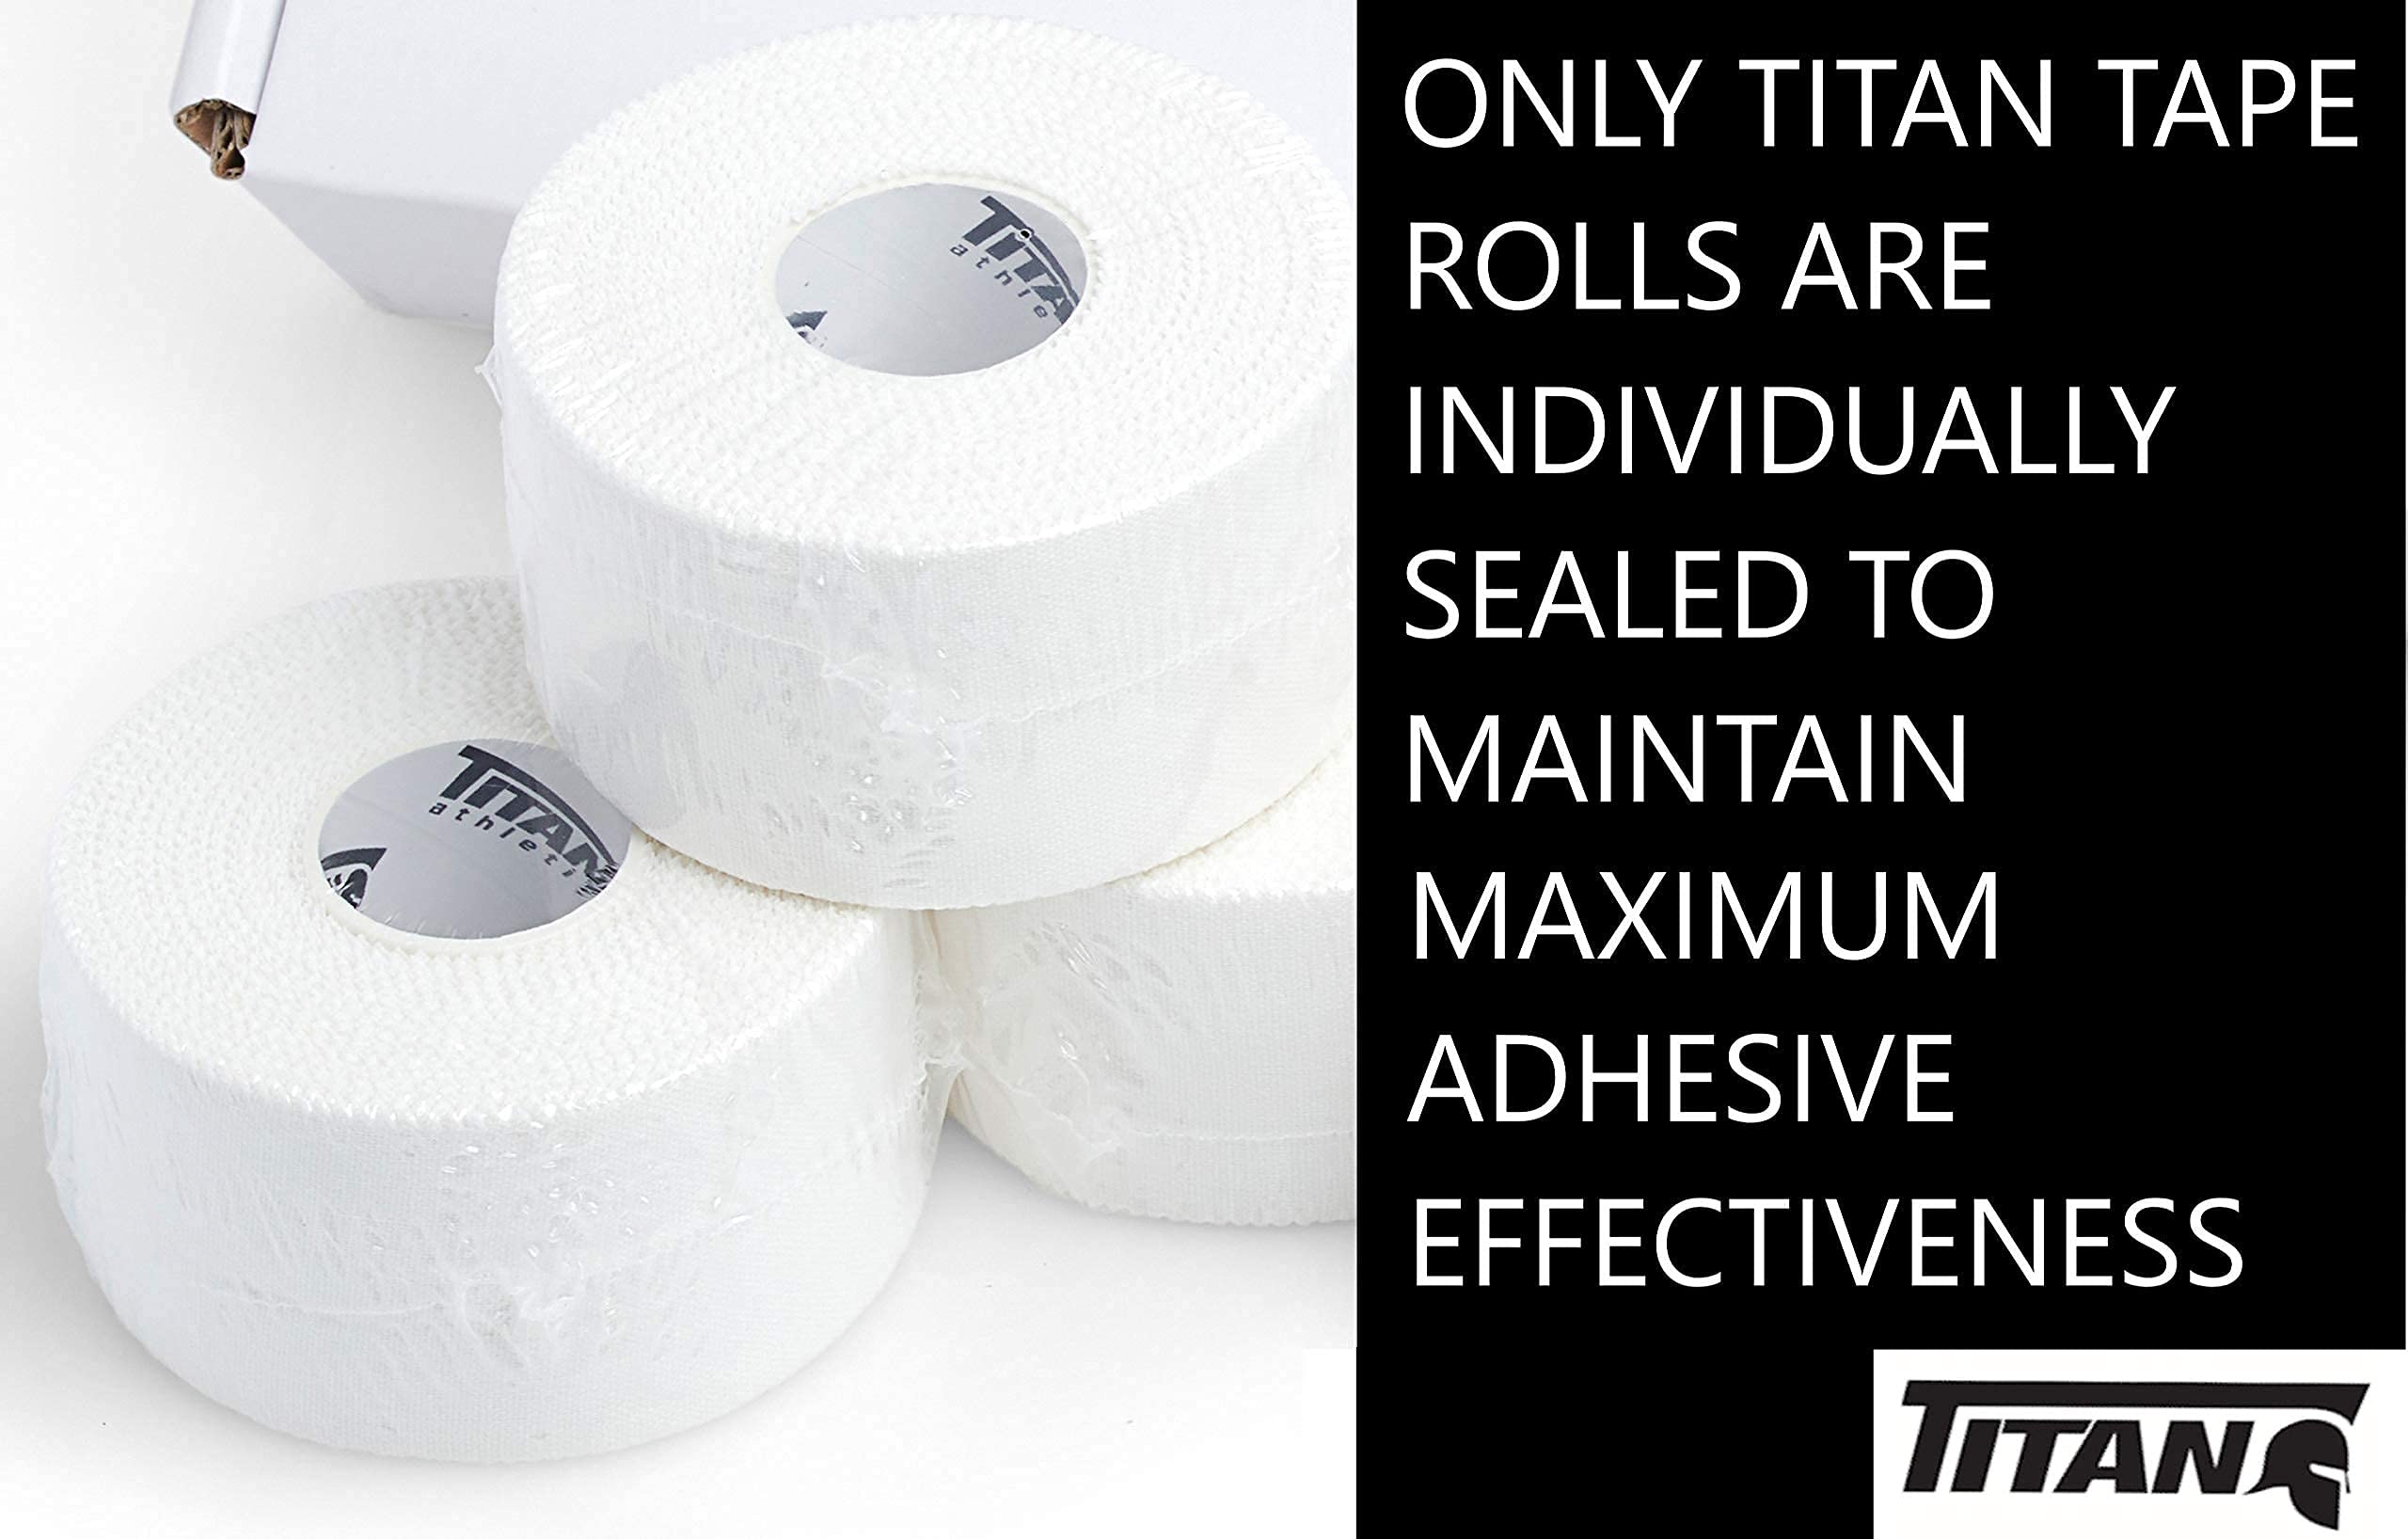 Titan Athletics - 12 Pack of Premium Quality White Athletic Tape/Sports Tape - 1 1/2 Inch x 45 Feet Per Roll - 100 Percent Cotton with Zinc Oxide - Easy Tear Zig Zag Design and No Sticky Residue